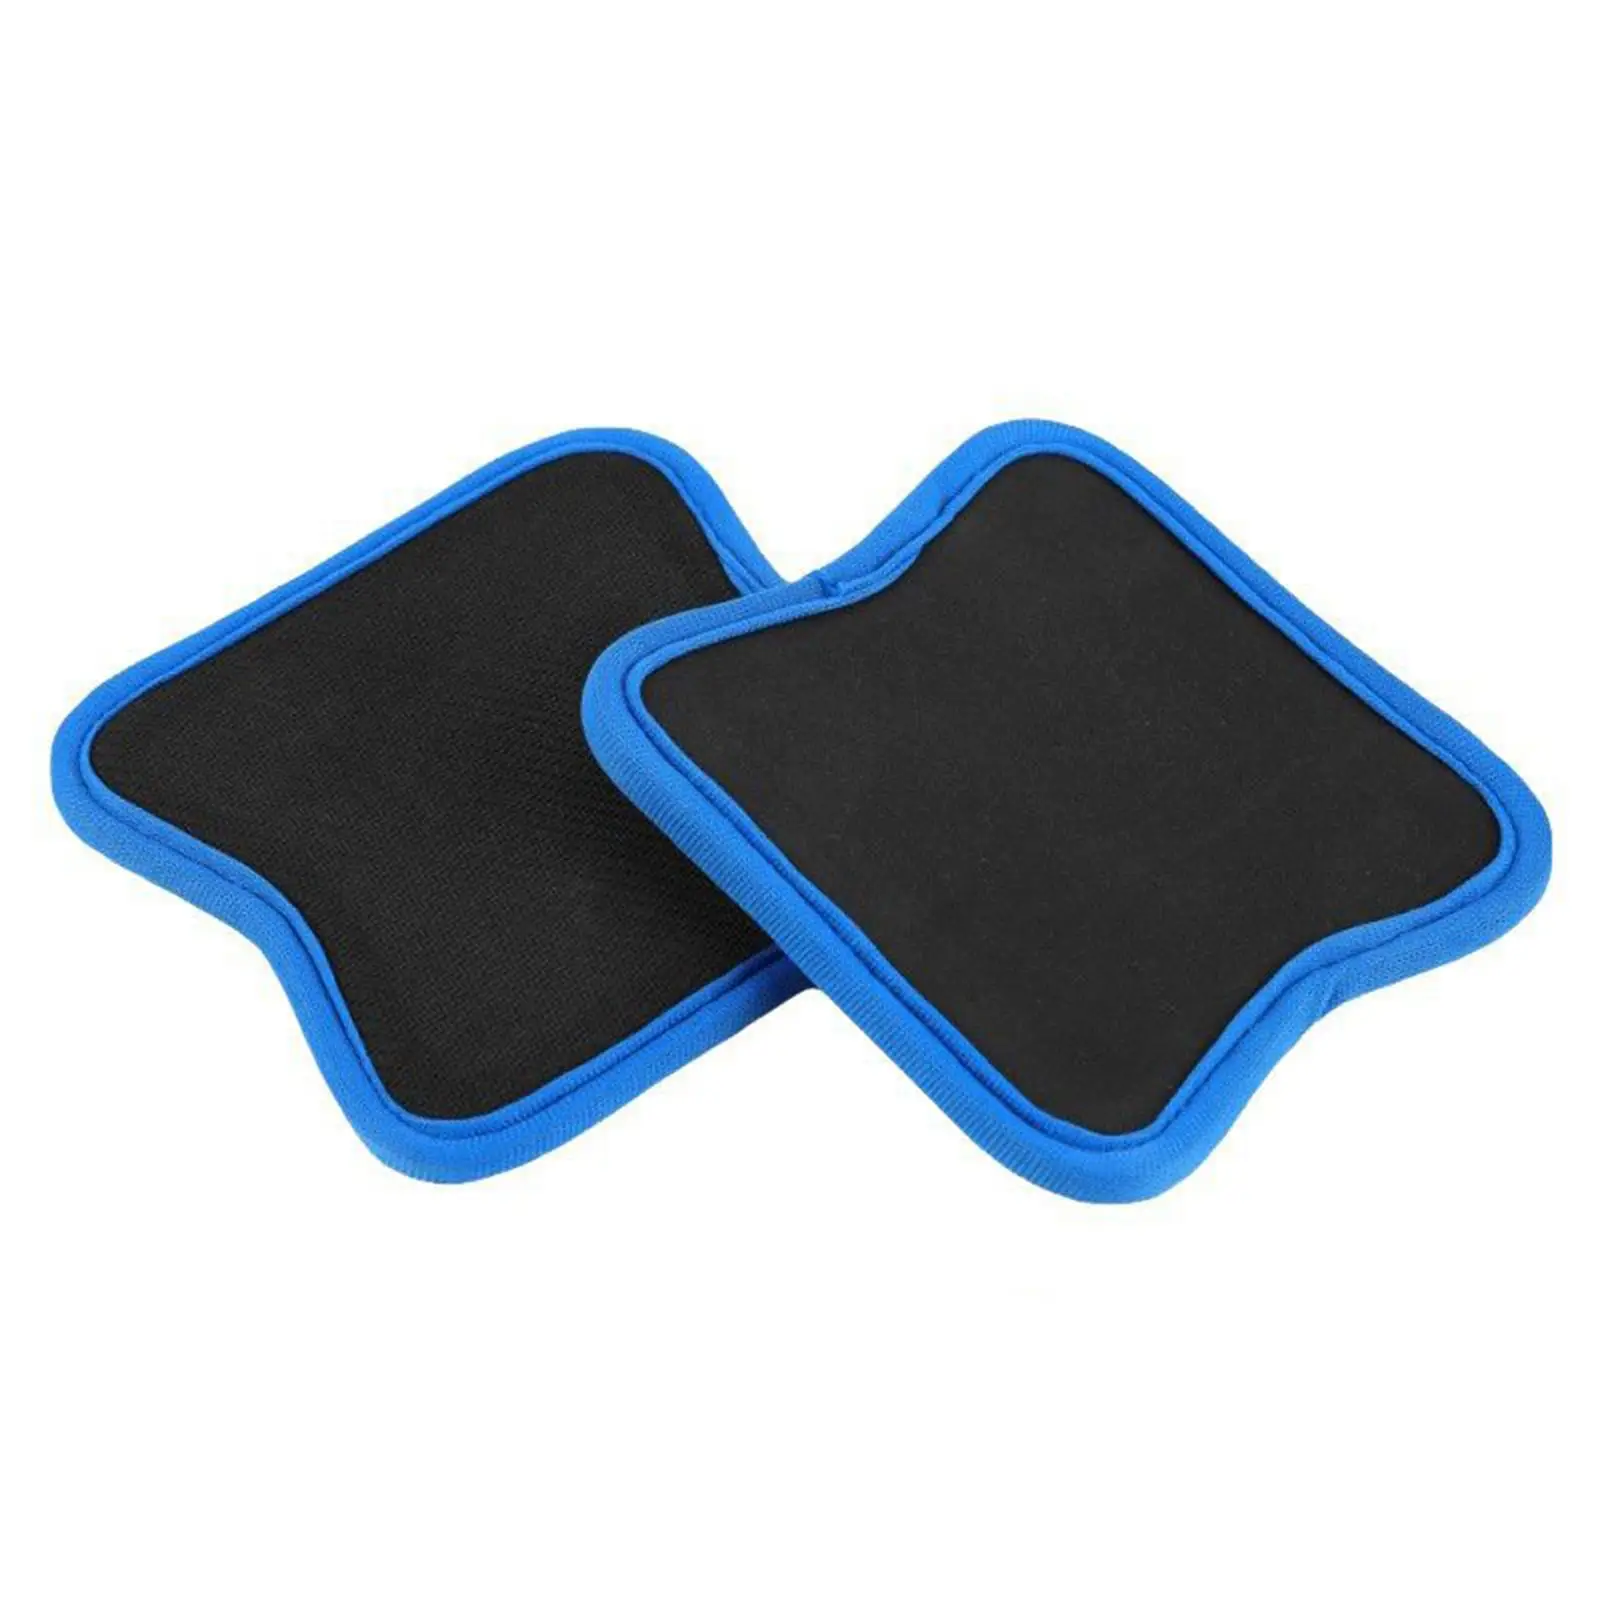 2 Pack Gym Grip Pads Protector No Sweaty Hands Palm Protection Comfort Weightlifting Grip Pad for Sports Training Women Men